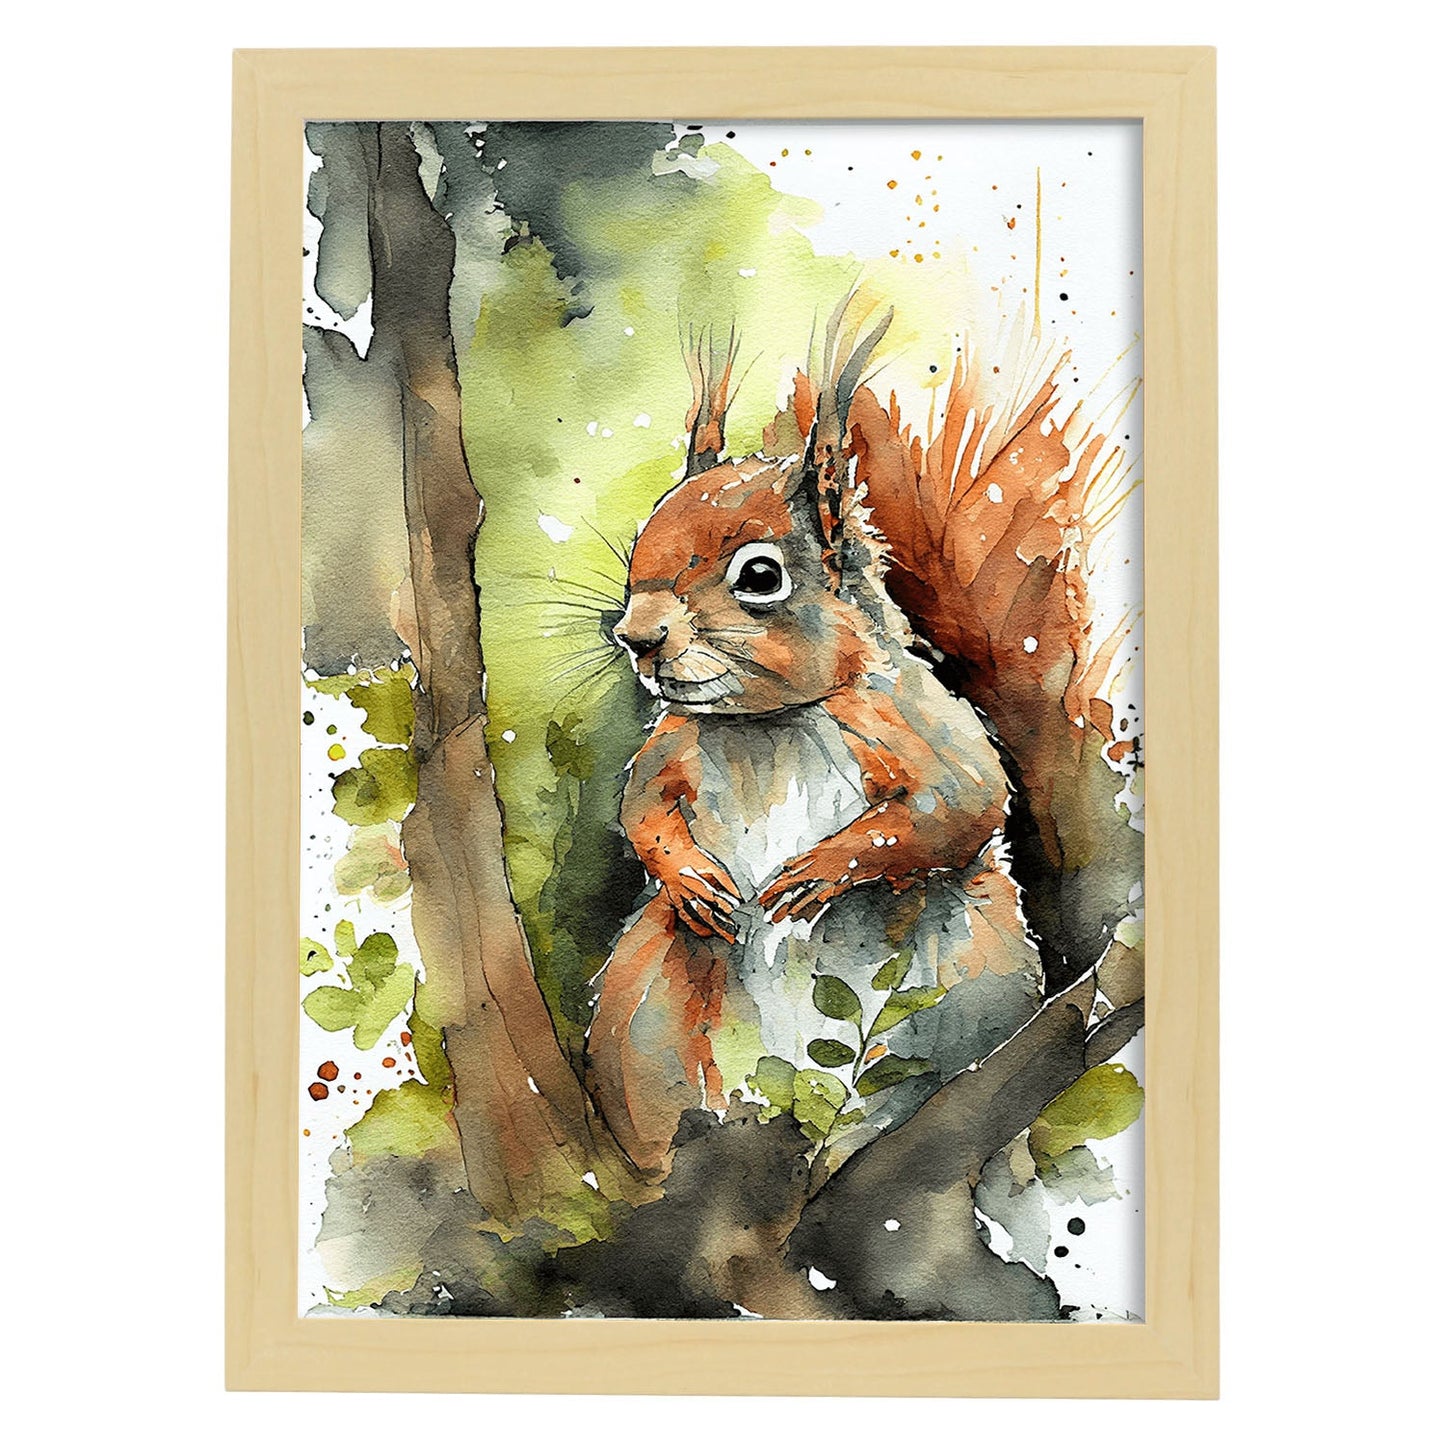 Nacnic Watercolor of Squirrel in the forest. Aesthetic Wall Art Prints for Bedroom or Living Room Design.